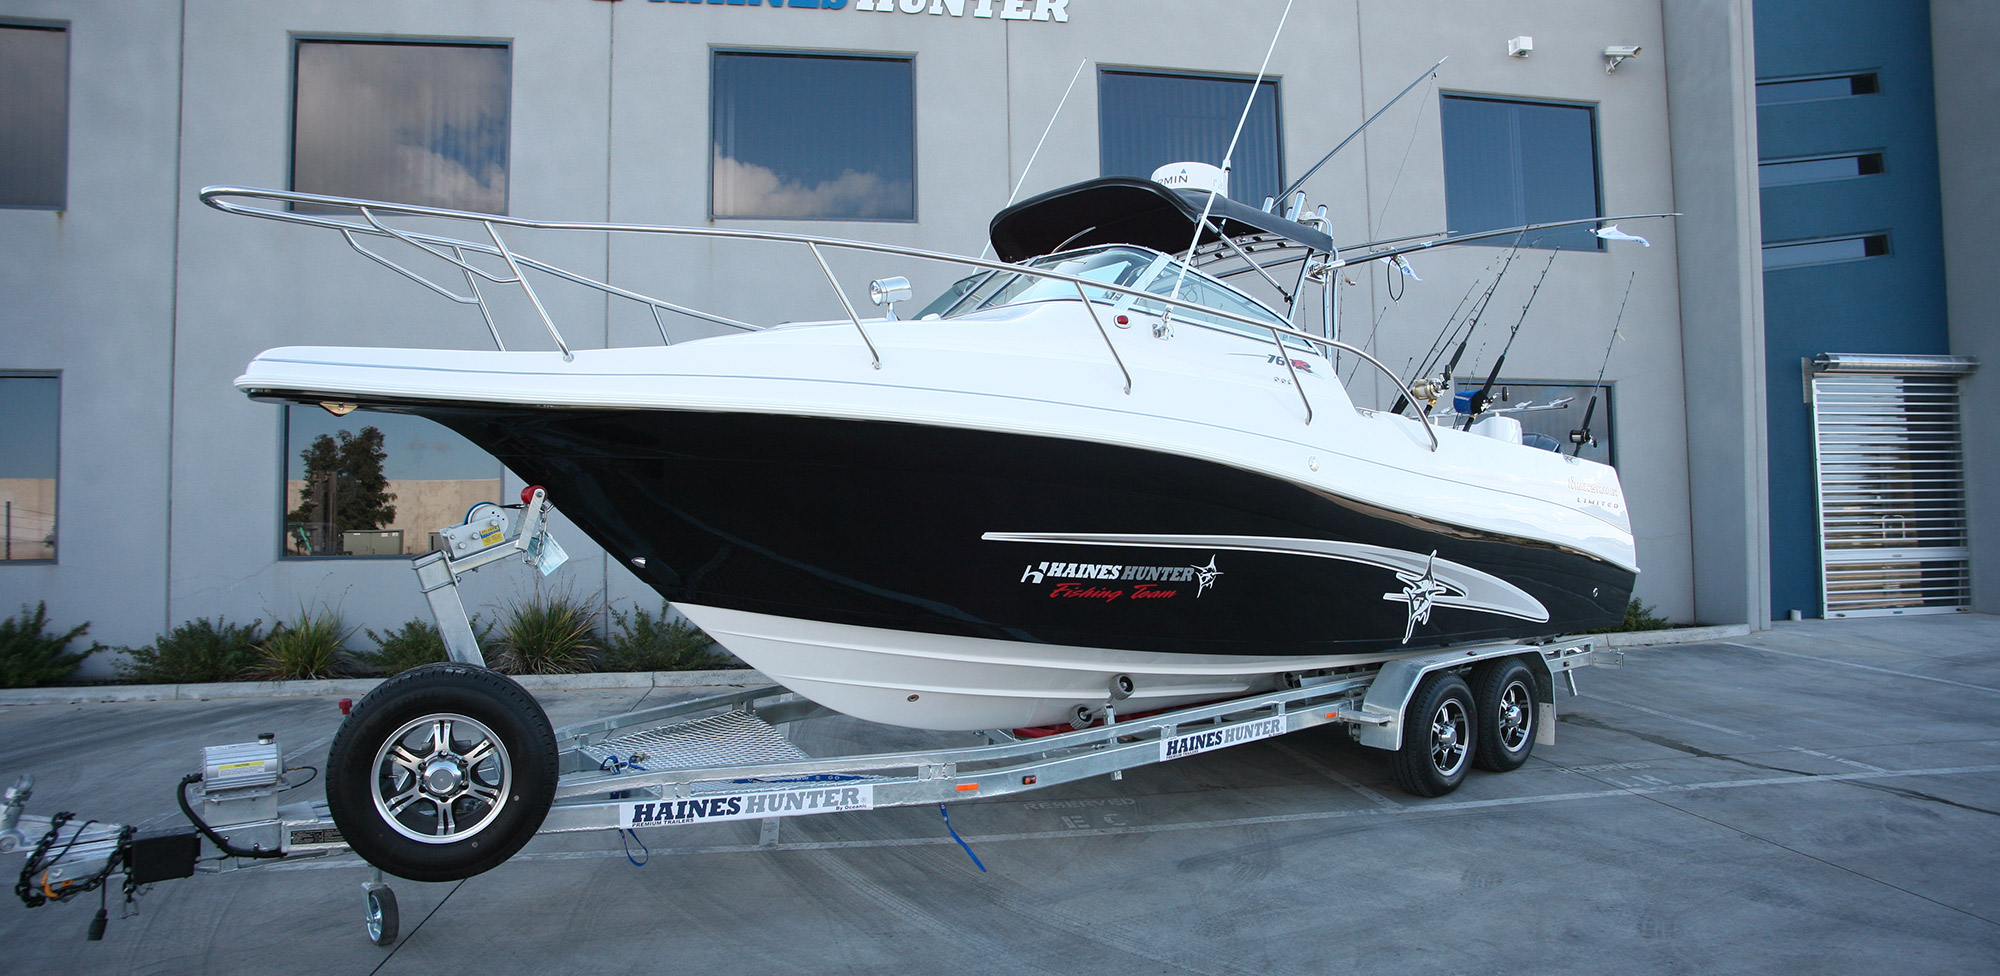 Haines Hunter 760 Patriot Boats with a V-Hull Hull for Fibreglass Use for  Sale in Australia 